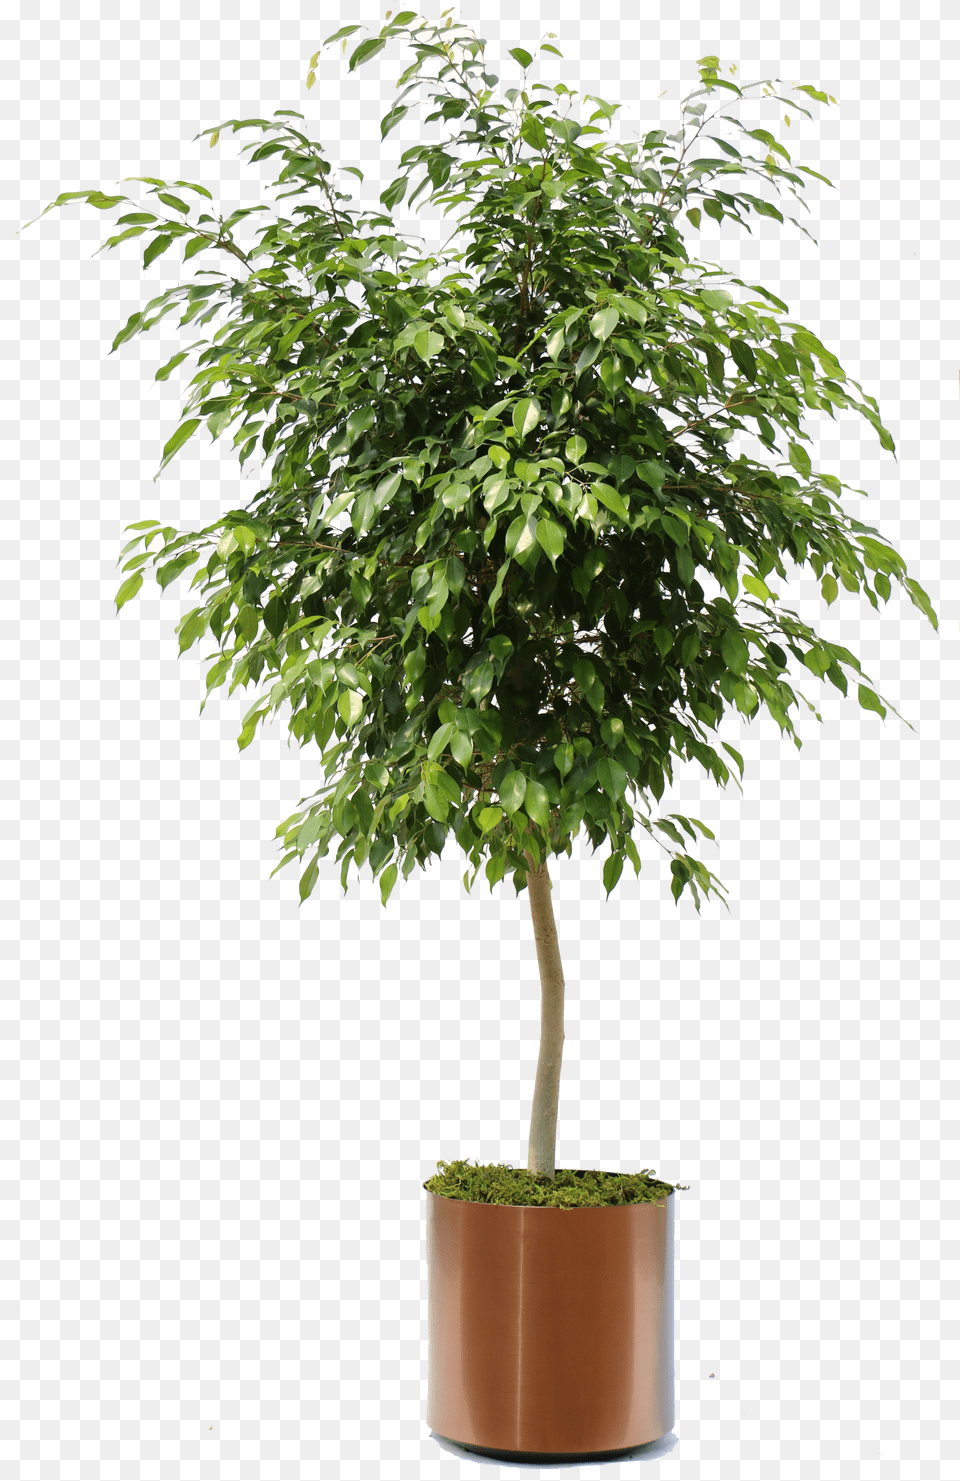 Overview Of The Many Plants We Can Bring To Your Office Small Ficus Tree, Leaf, Maple, Plant, Potted Plant Png